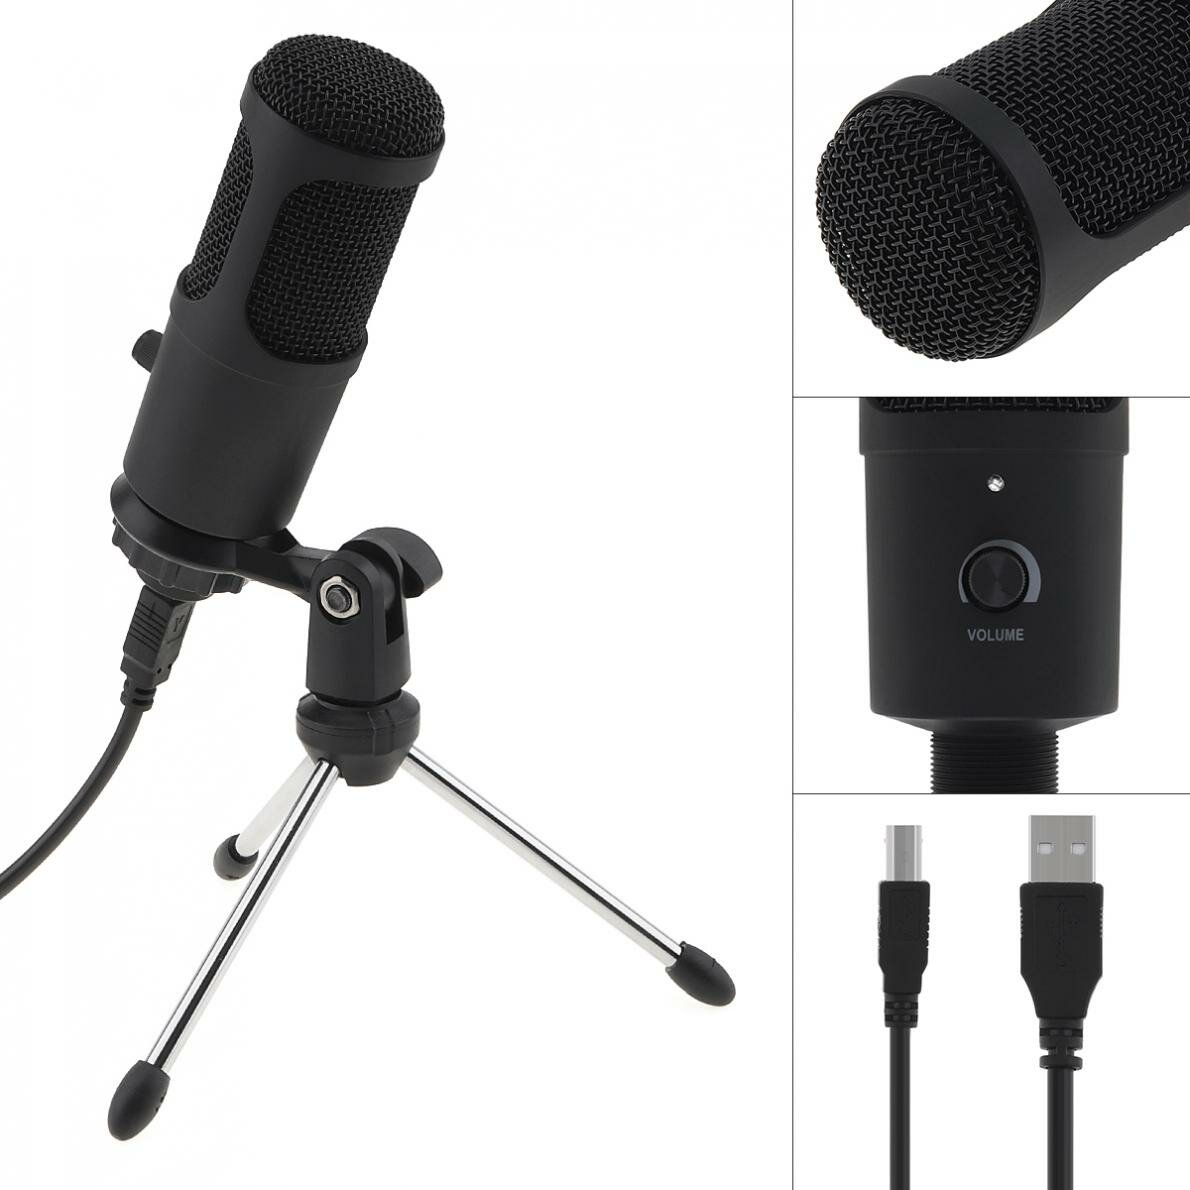 

Bakeey A6 Metal USB Condenser Microphone Recording for Laptop Computer Windows Cardioid Recording Vocals Voice for Live